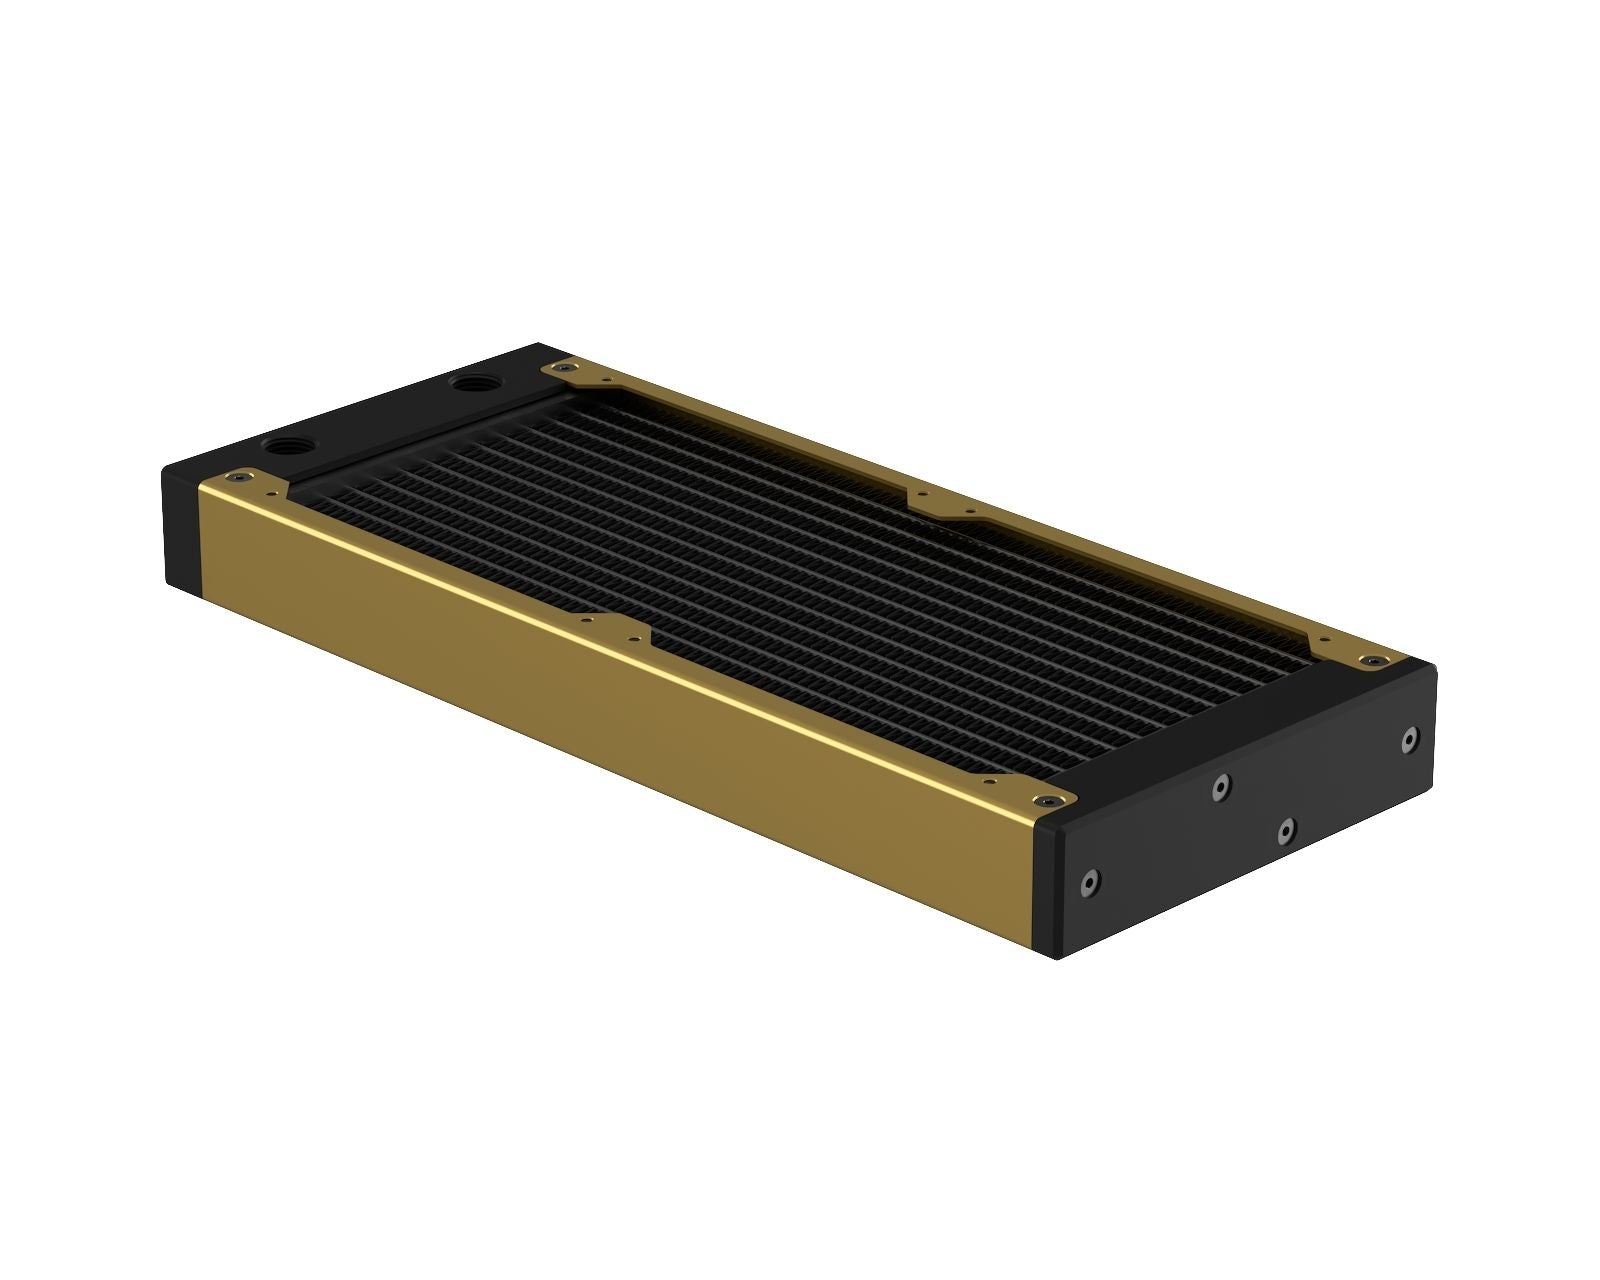 PrimoChill 240SL (30mm) EXIMO Modular Radiator, Black POM, 2x120mm, Dual Fan (R-SL-BK24) Available in 20+ Colors, Assembled in USA and Custom Watercooling Loop Ready - Candy Gold